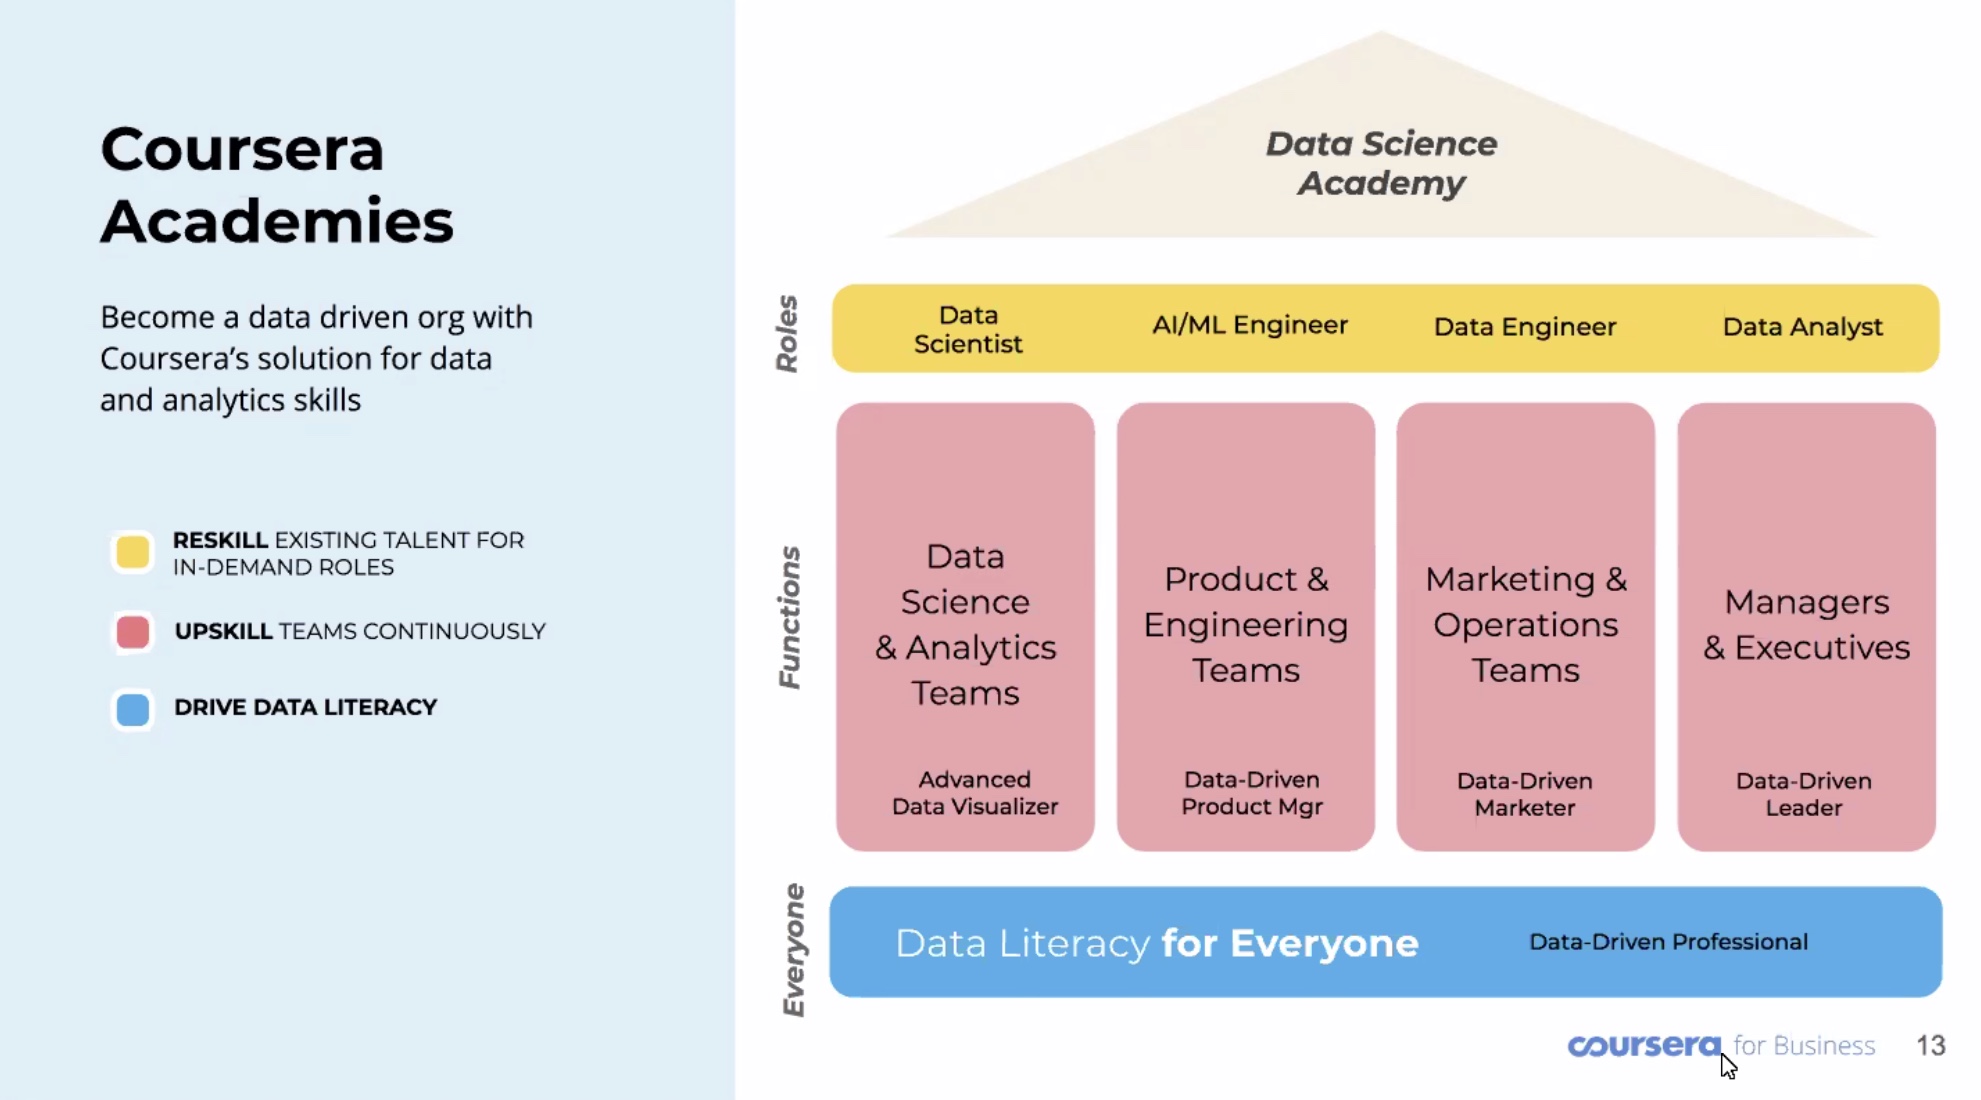 Coursera Academies and the Data Science Academy